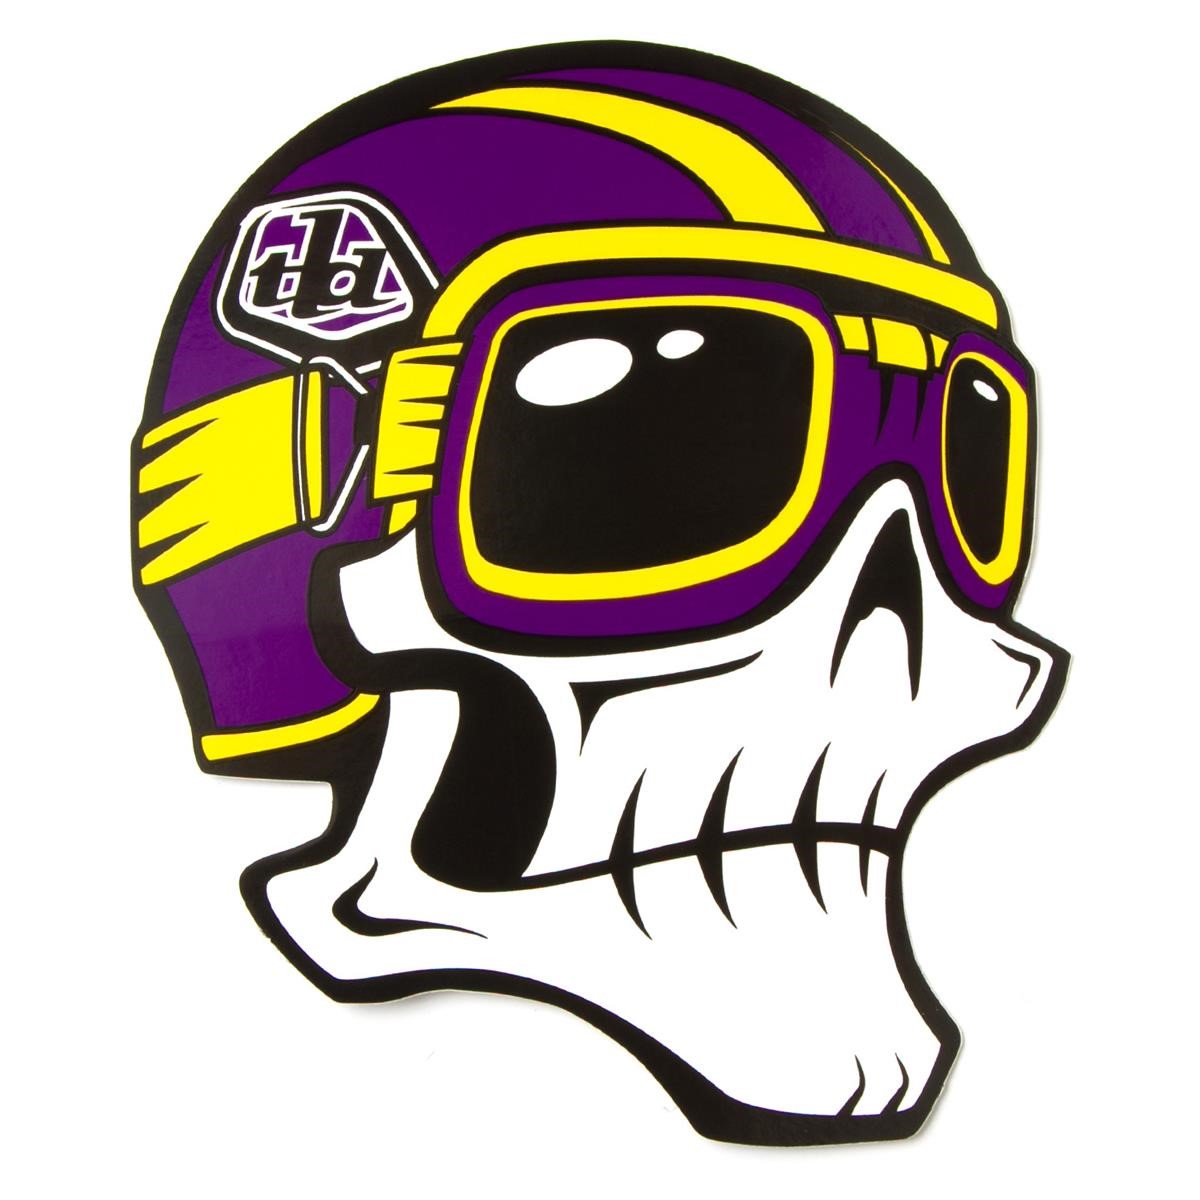 Troy Lee Designs Sticker Skully Violet/Yellow - 5 inches